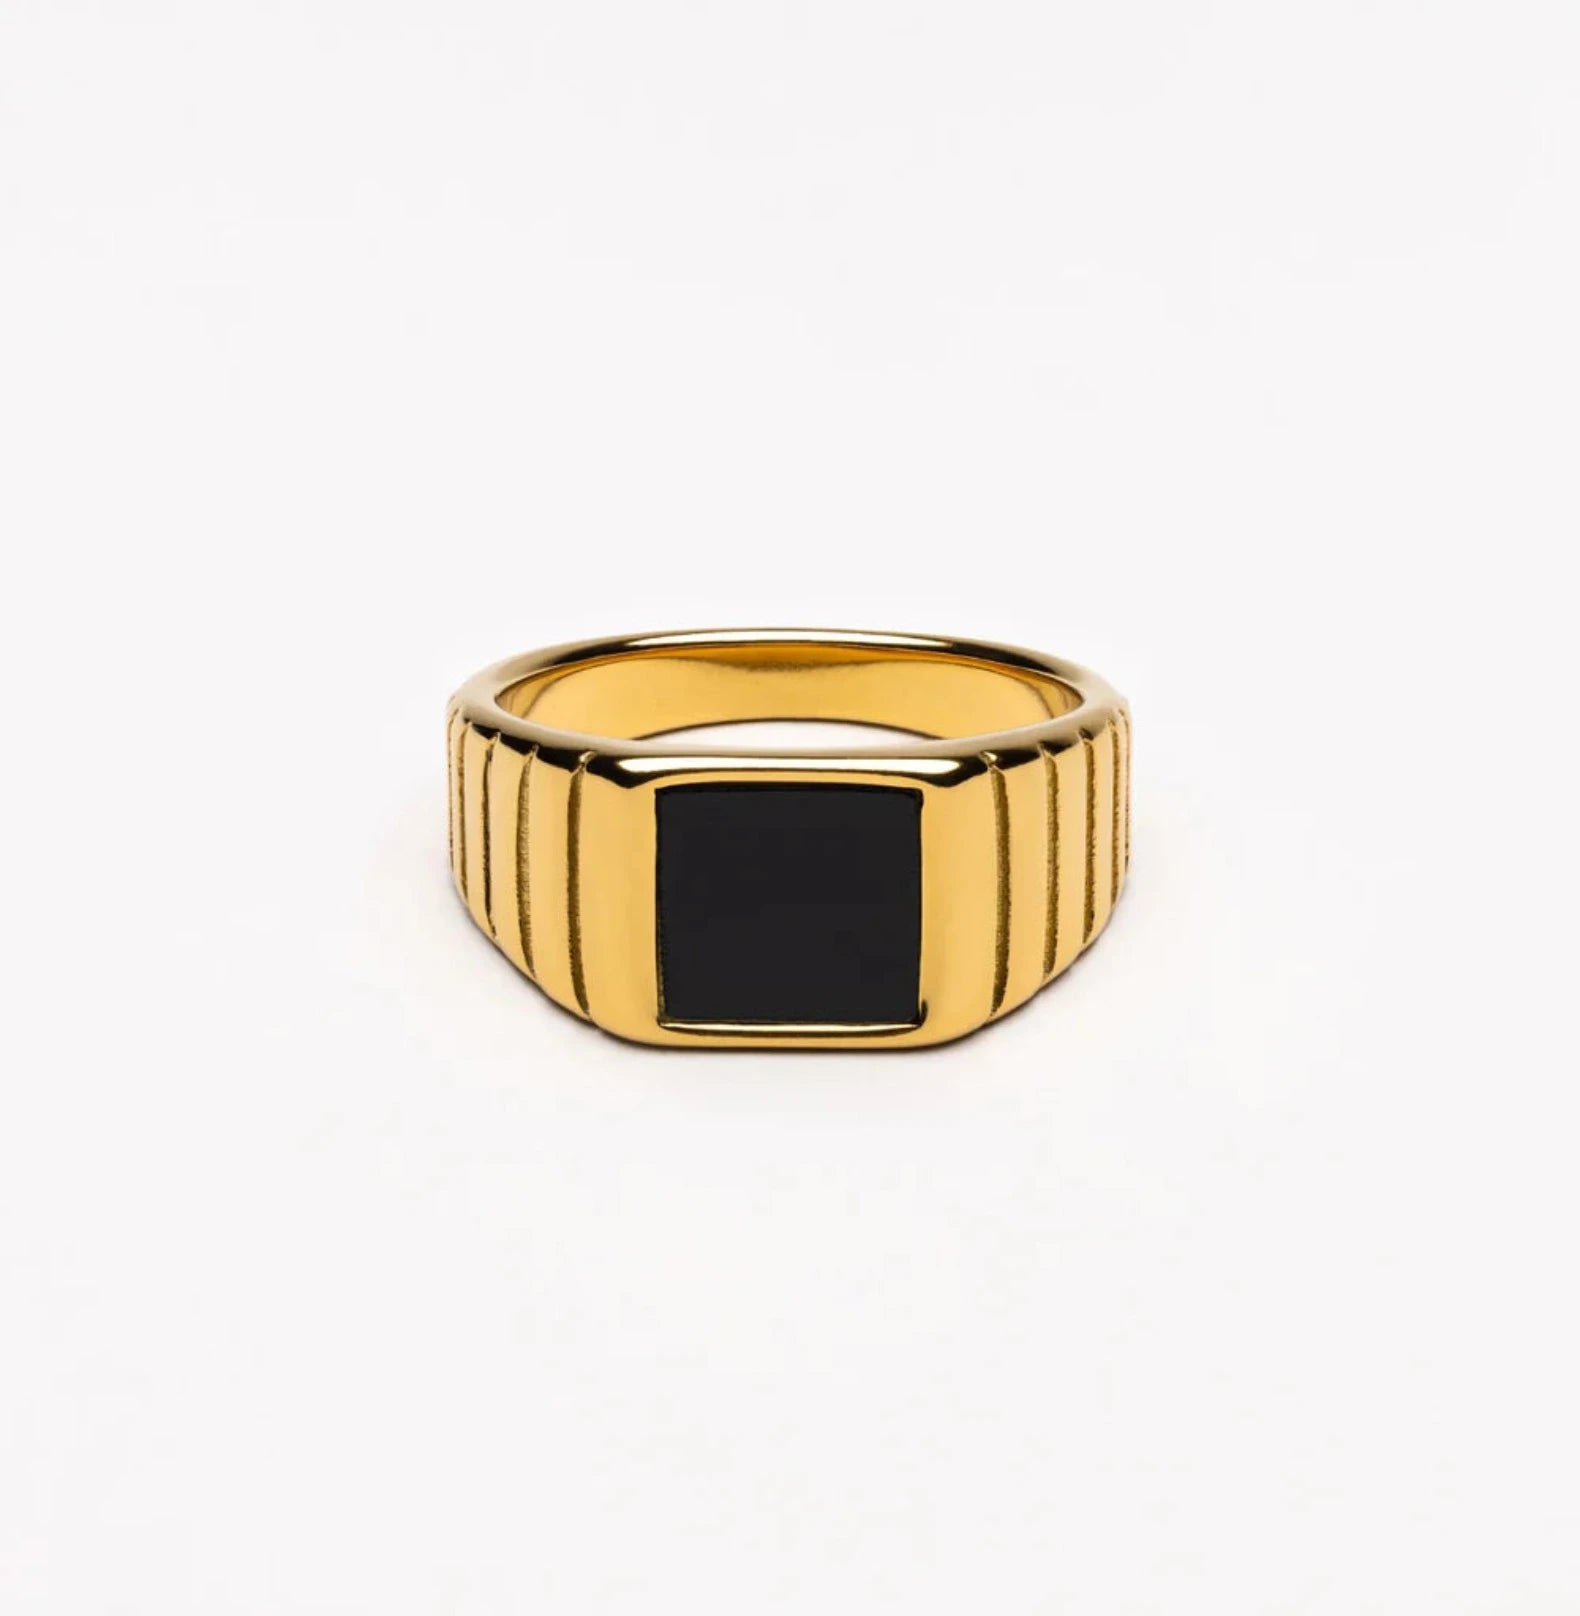 ONYX RING ring Yubama Jewelry Online Store - The Elegant Designs of Gold and Silver ! 